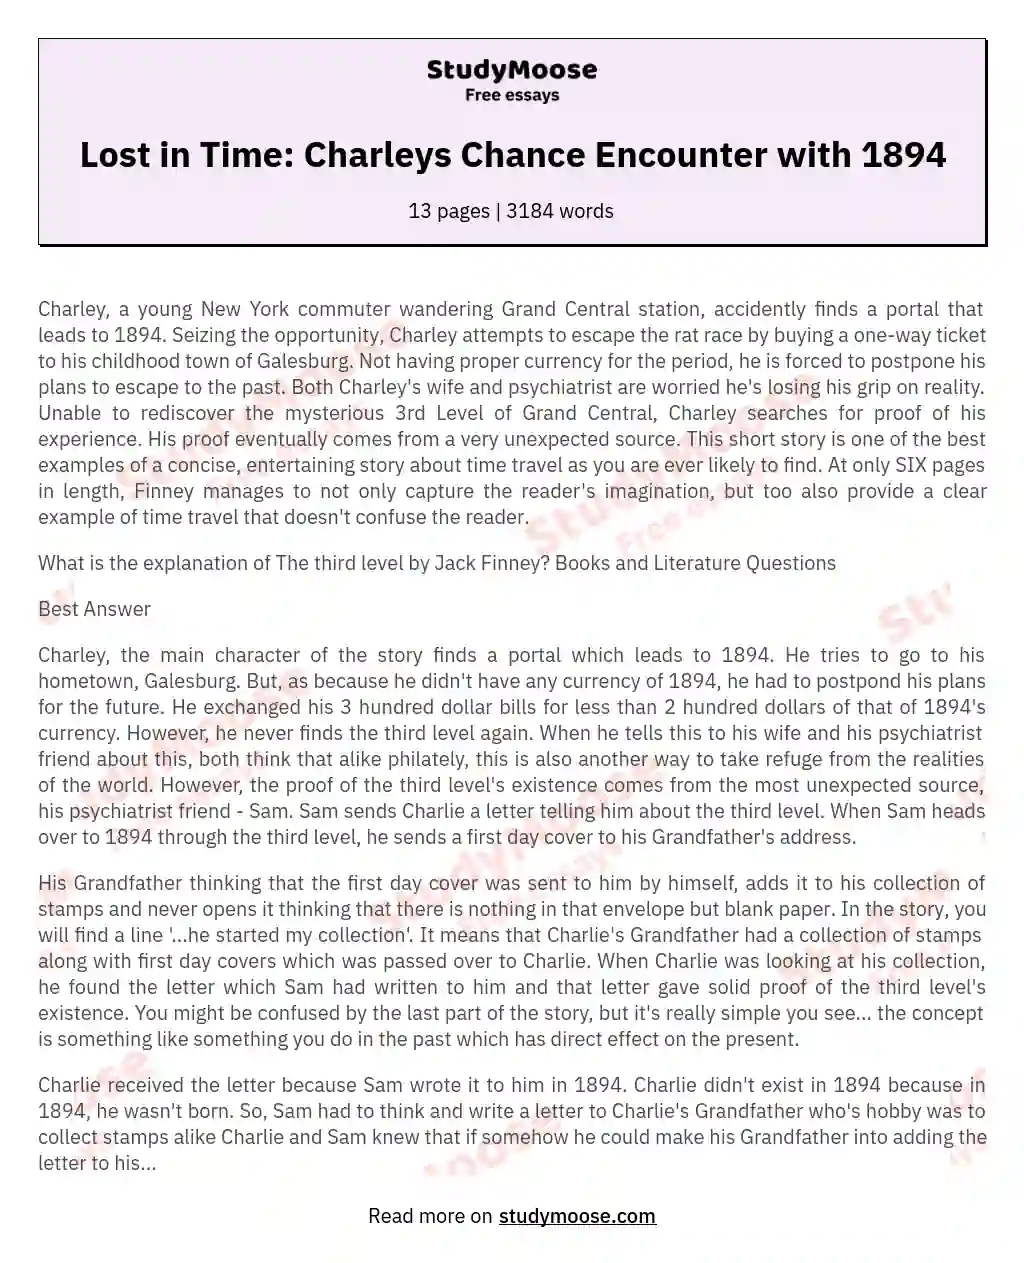 Lost in Time: Charleys Chance Encounter with 1894 essay